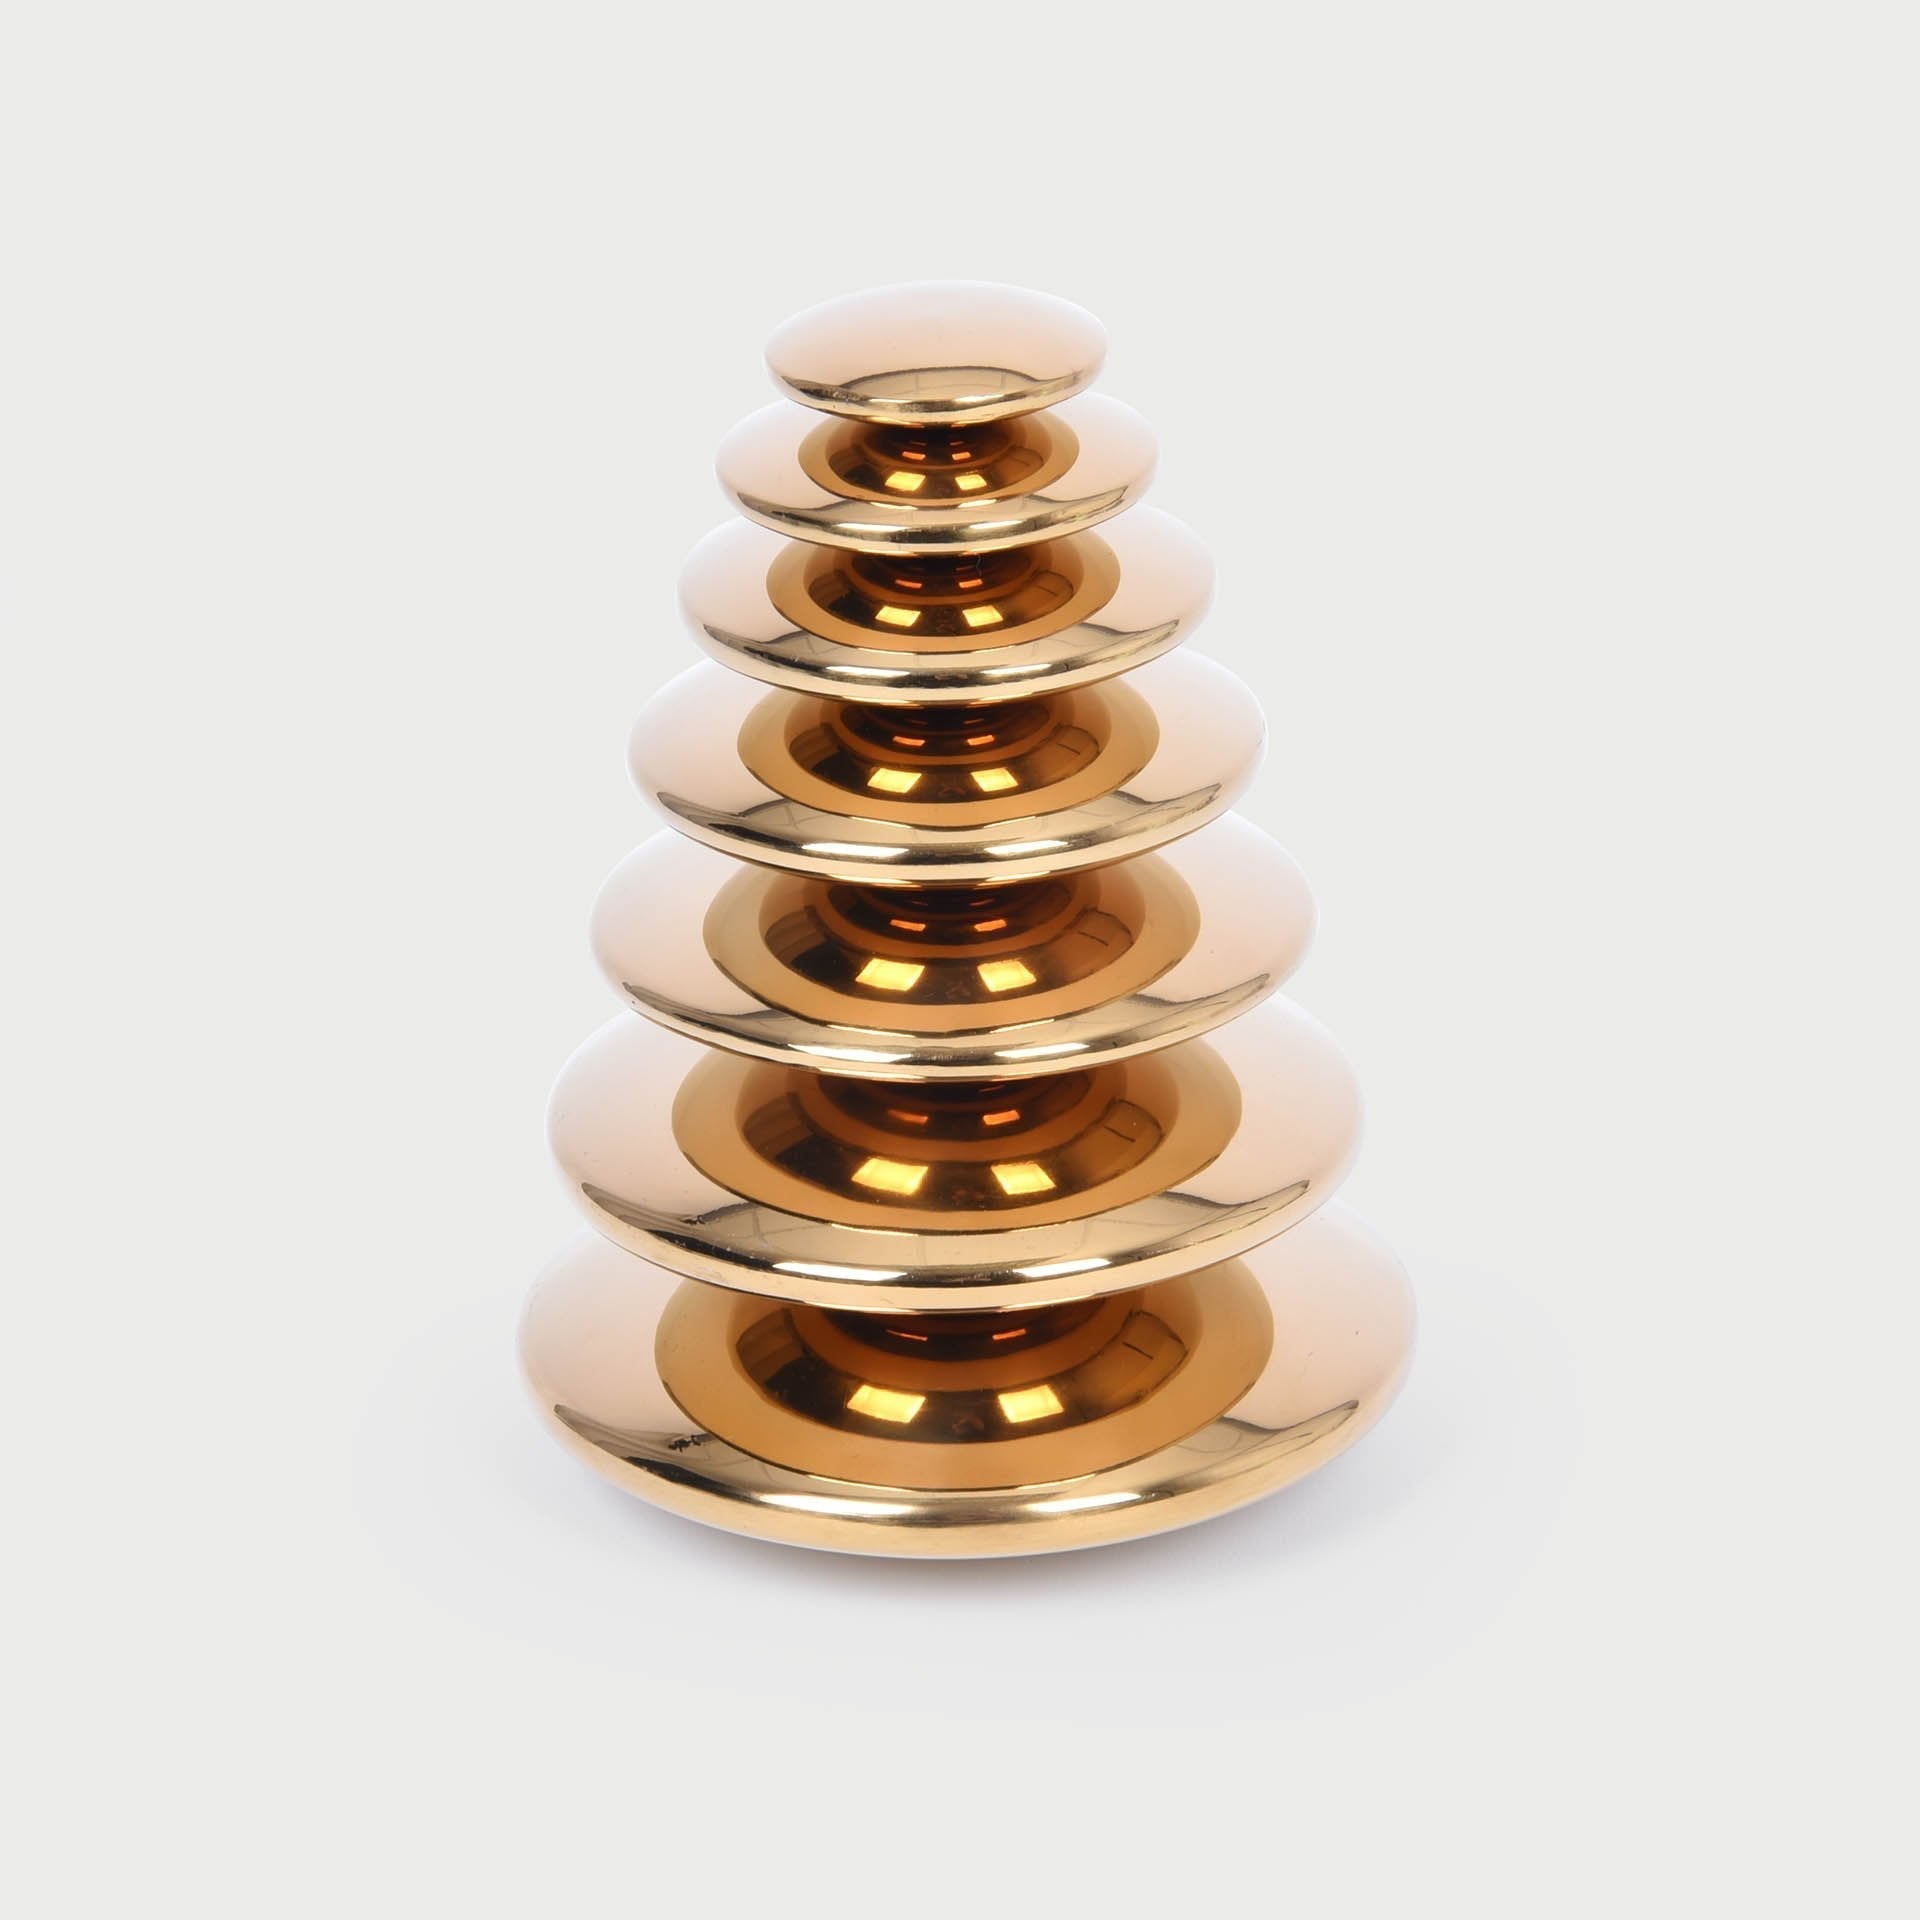 Sensory Reflective Gold Buttons, The Sensory Reflective Gold Buttons are robustly constructed from stainless steel, these 7 giant reflective gold buttons have a pleasingly rounded discus shape with smooth seamless edges and are graduated in size from 50mm to 140mm diameter. The Sensory Reflective Gold Buttons set comes as a delightful set of 7 gold button pieces. Having a metal construction makes our Sensory Buttons highly durable and with a deluxe feel. They are lightweight, smooth and compellingly tactile